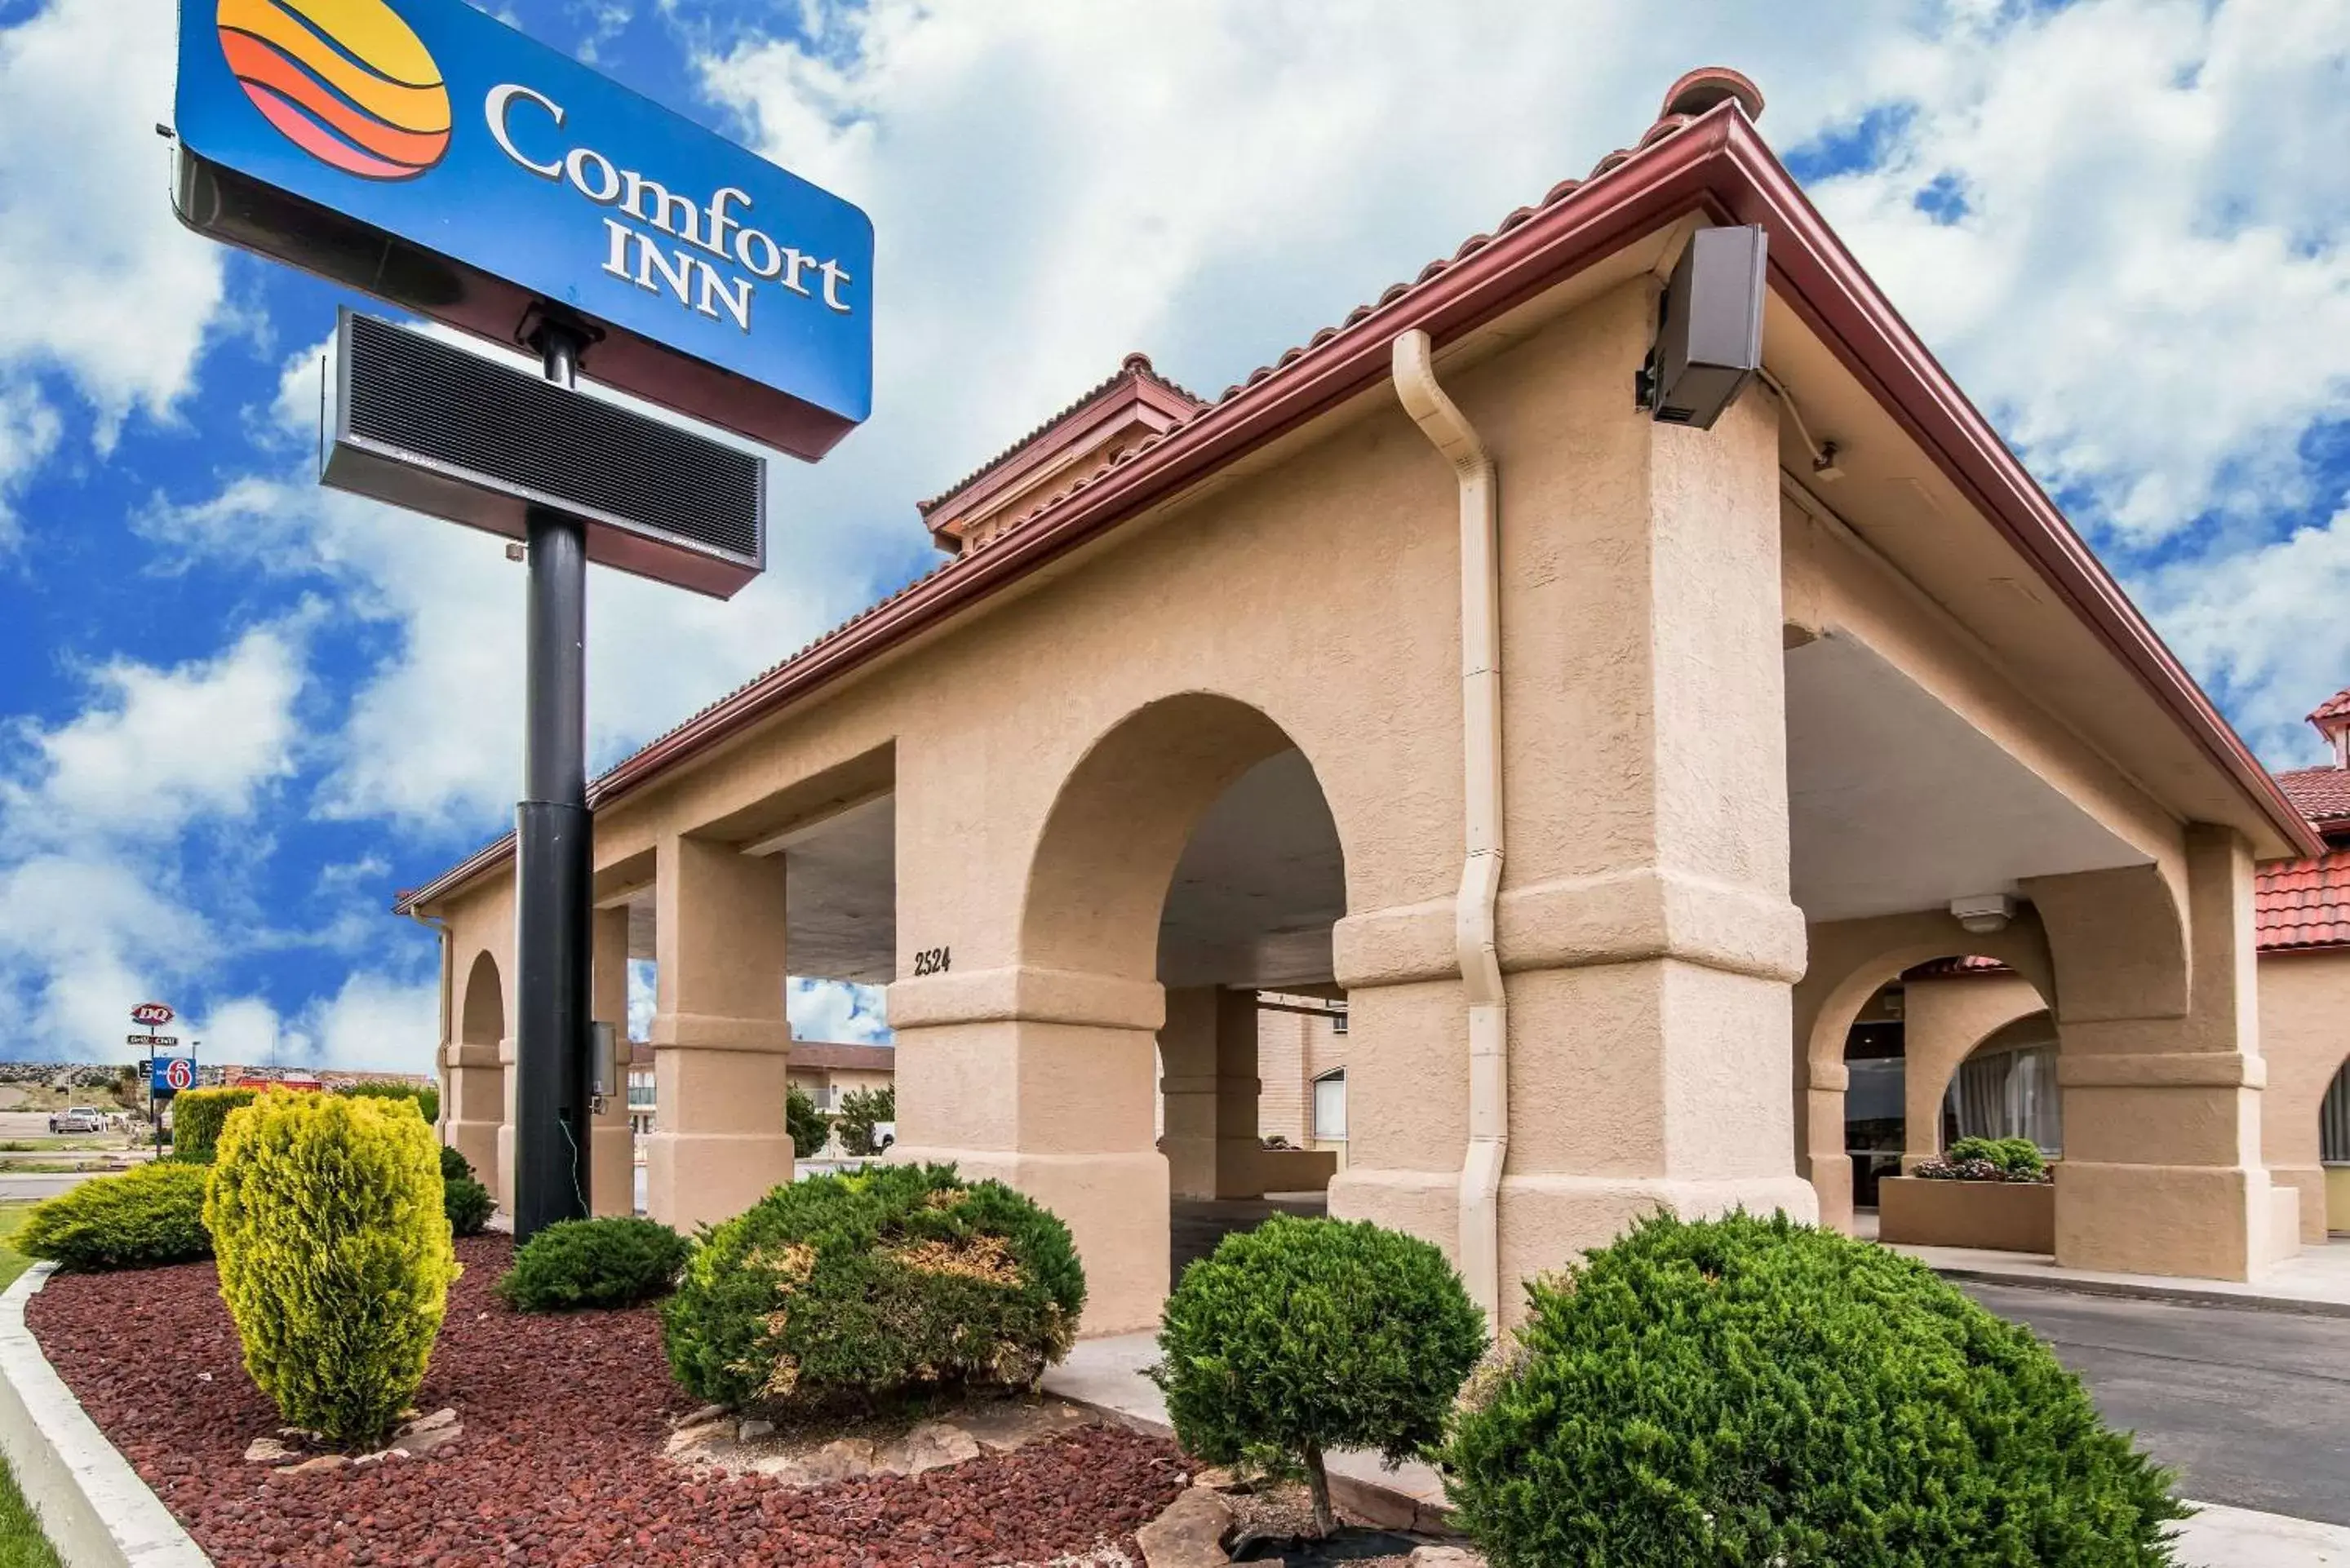 Property building in Comfort Inn City of Natural Lakes